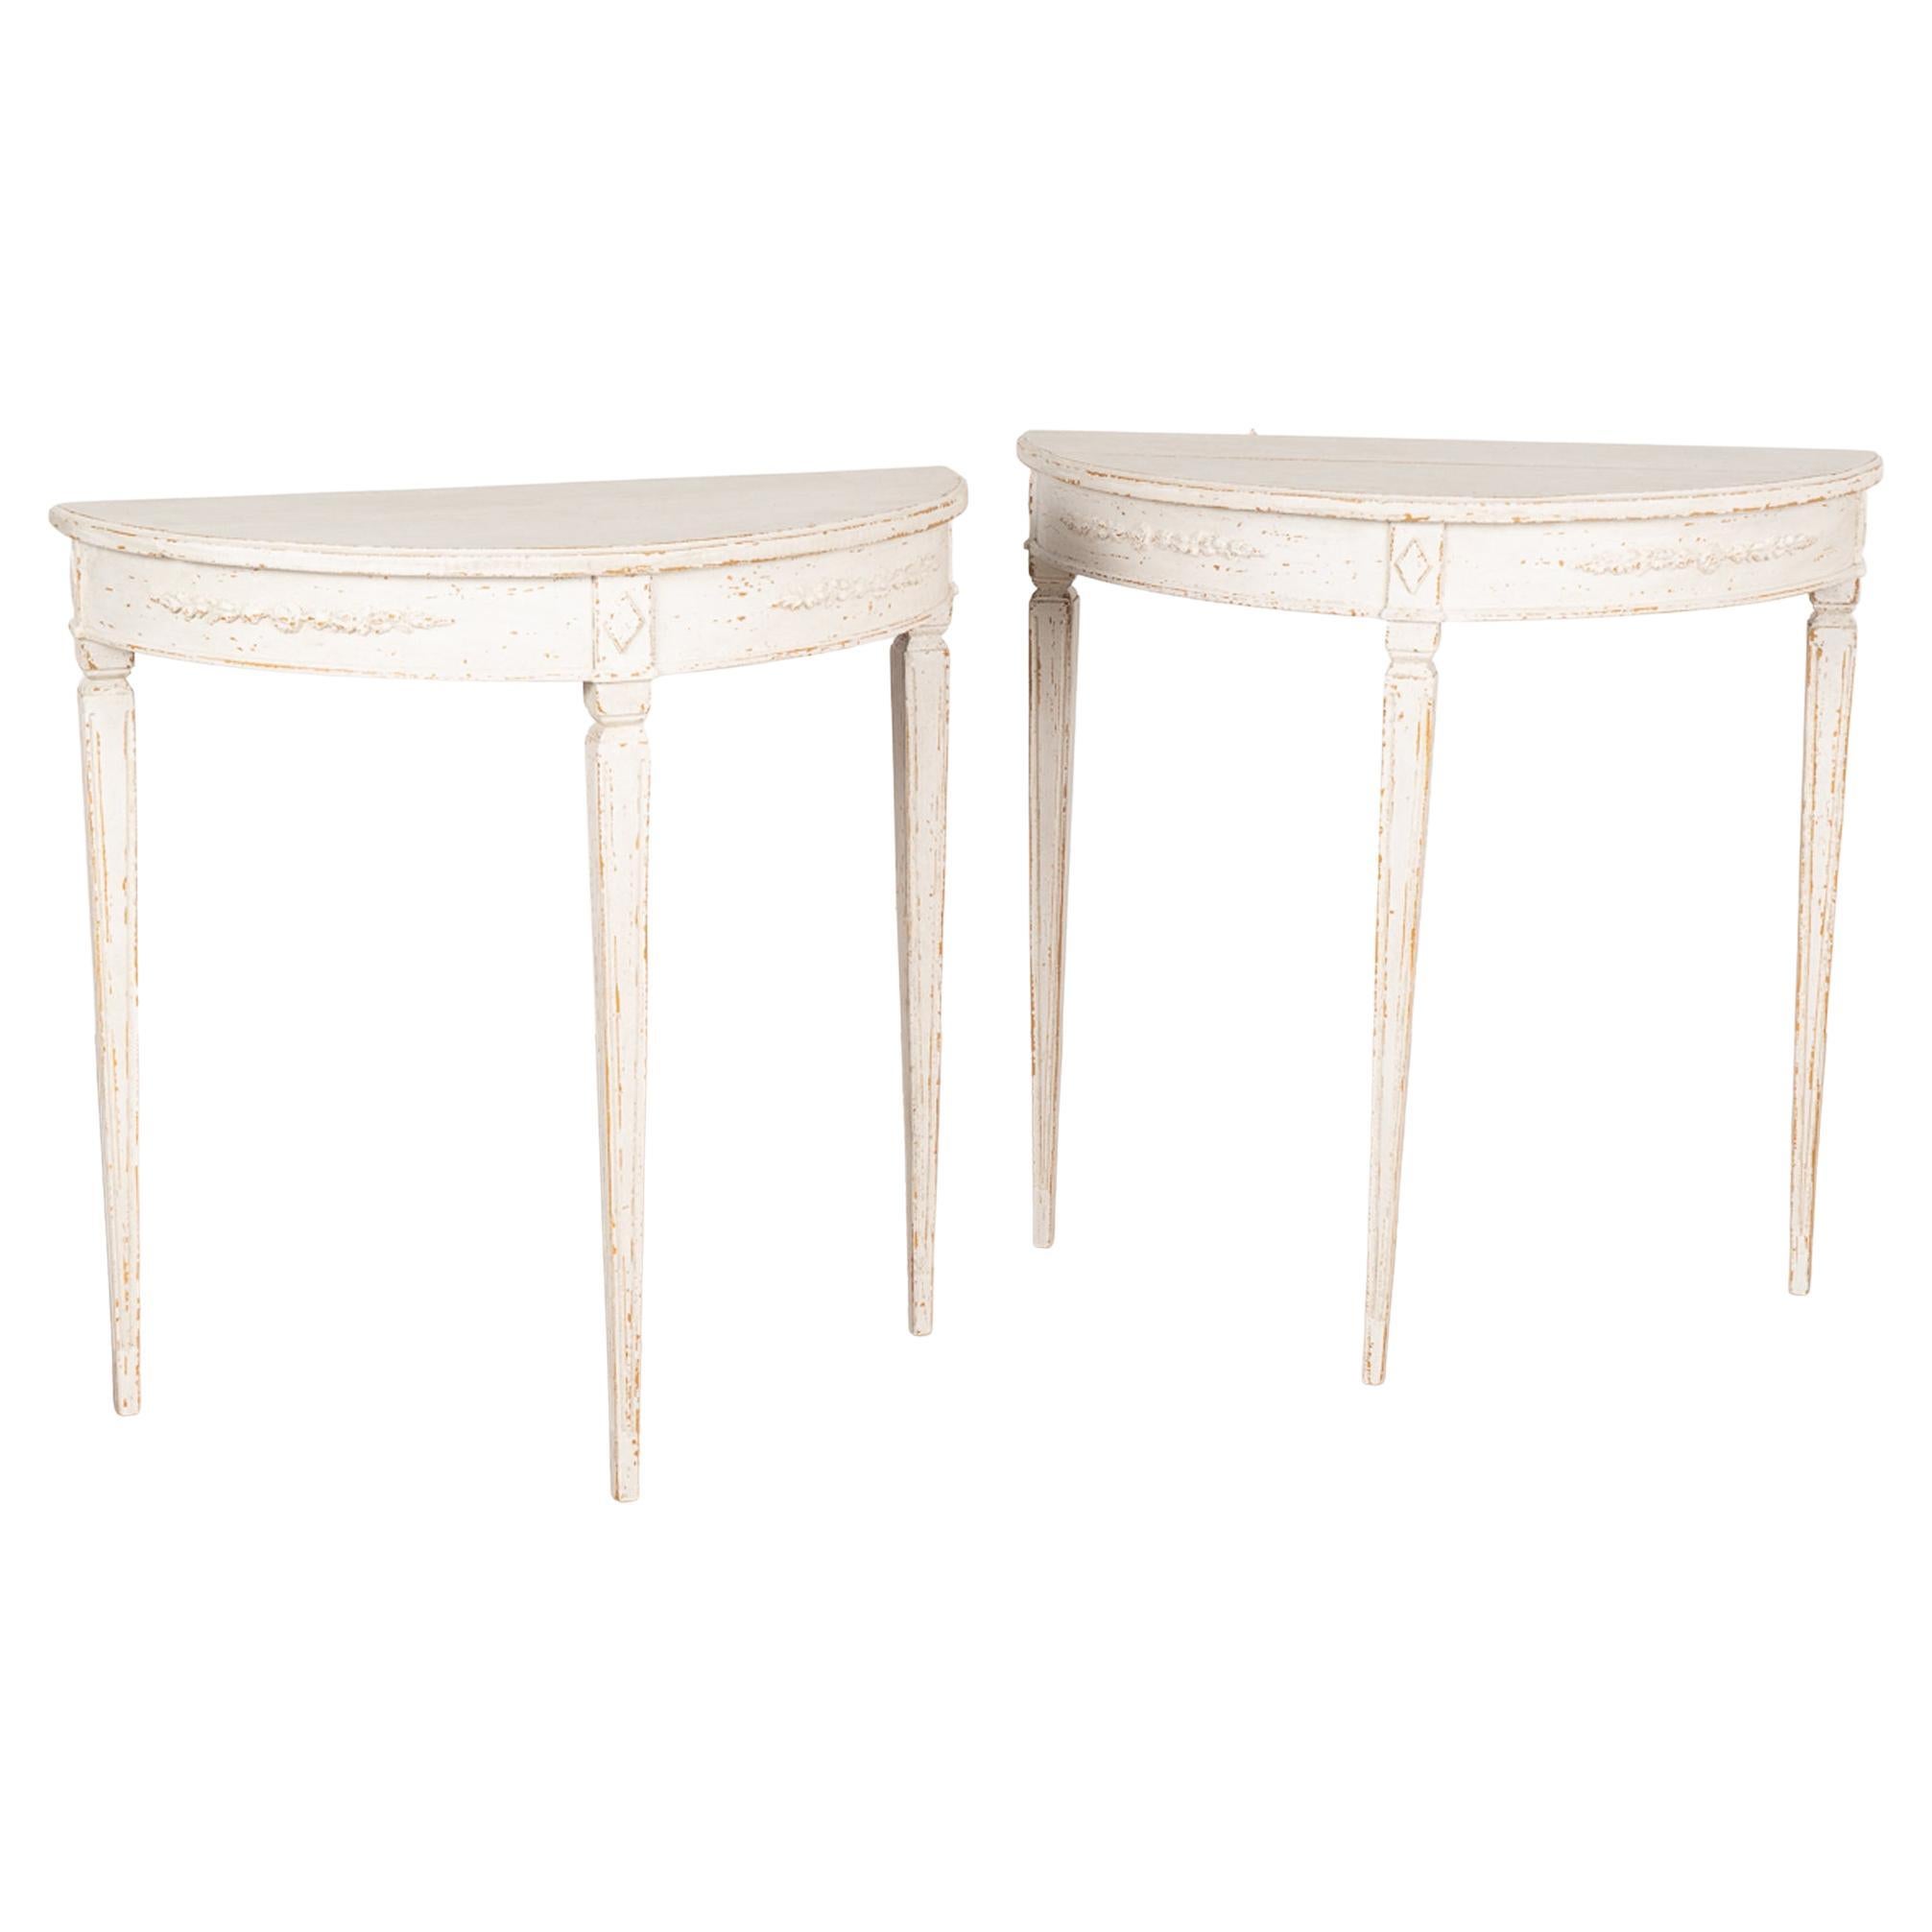 Pair, New White Painted Gustavian Demilune Side Tables from Sweden